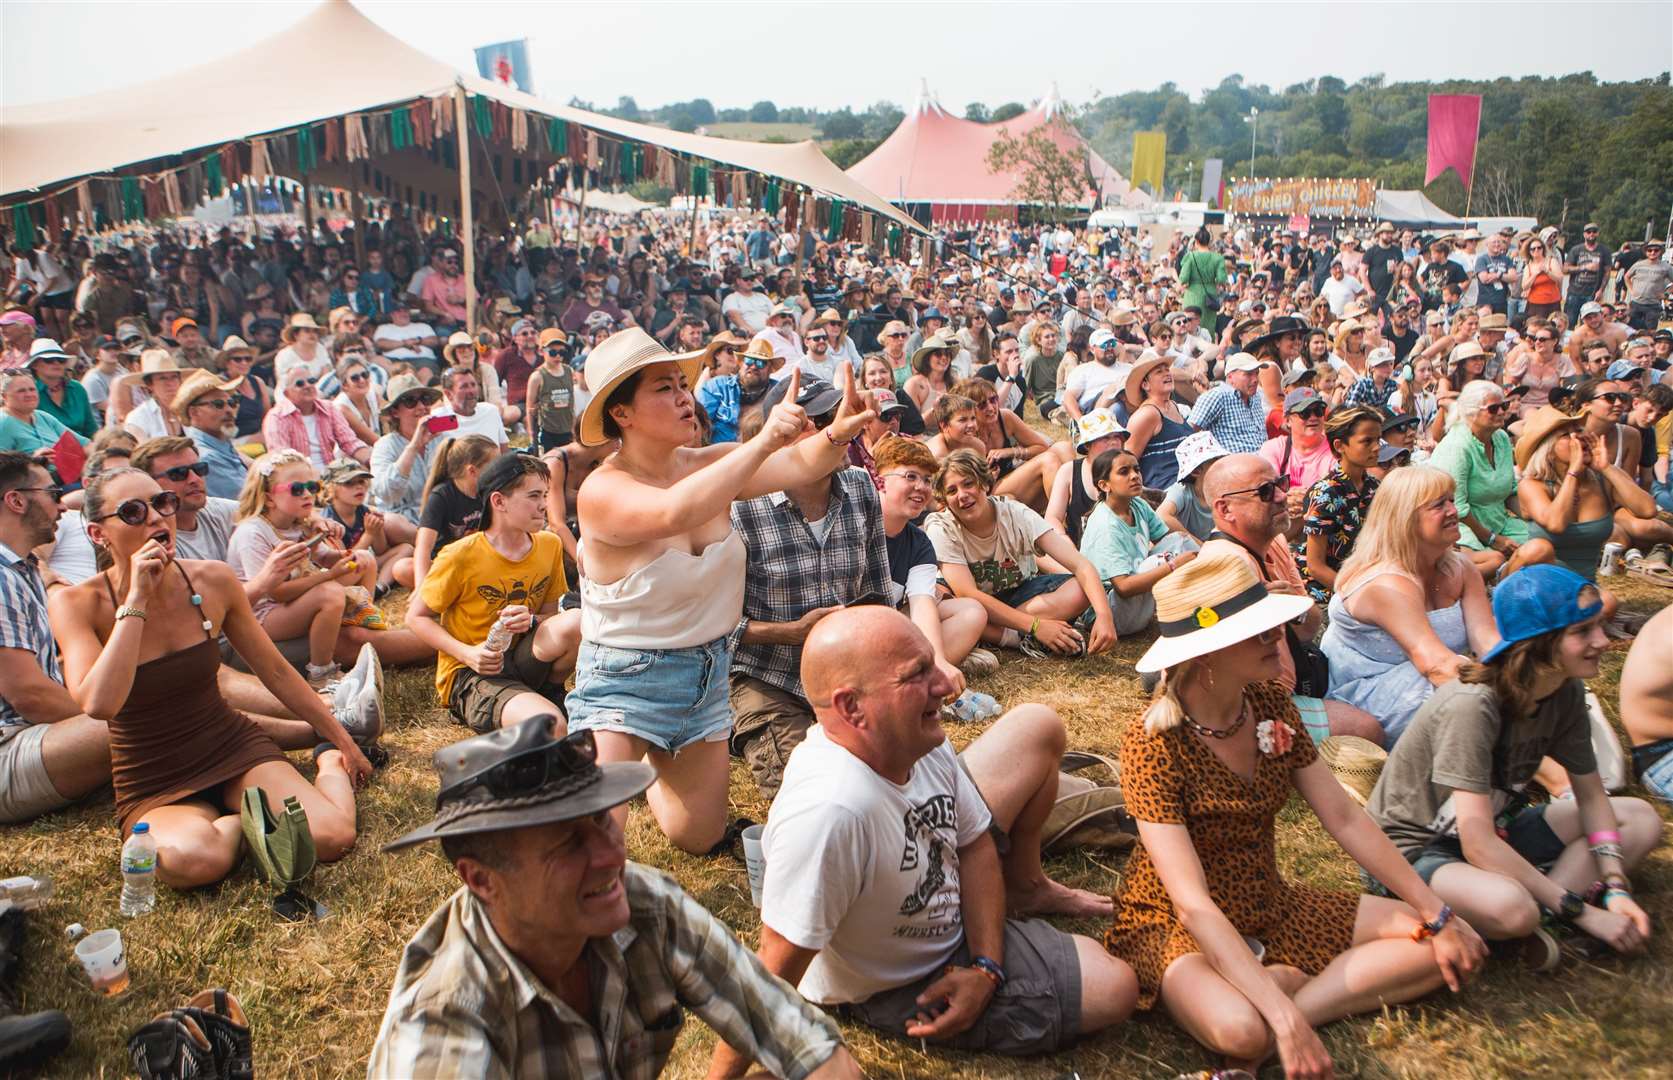 The crowd watching a chilli-eating competition at the Live Fire stage last year